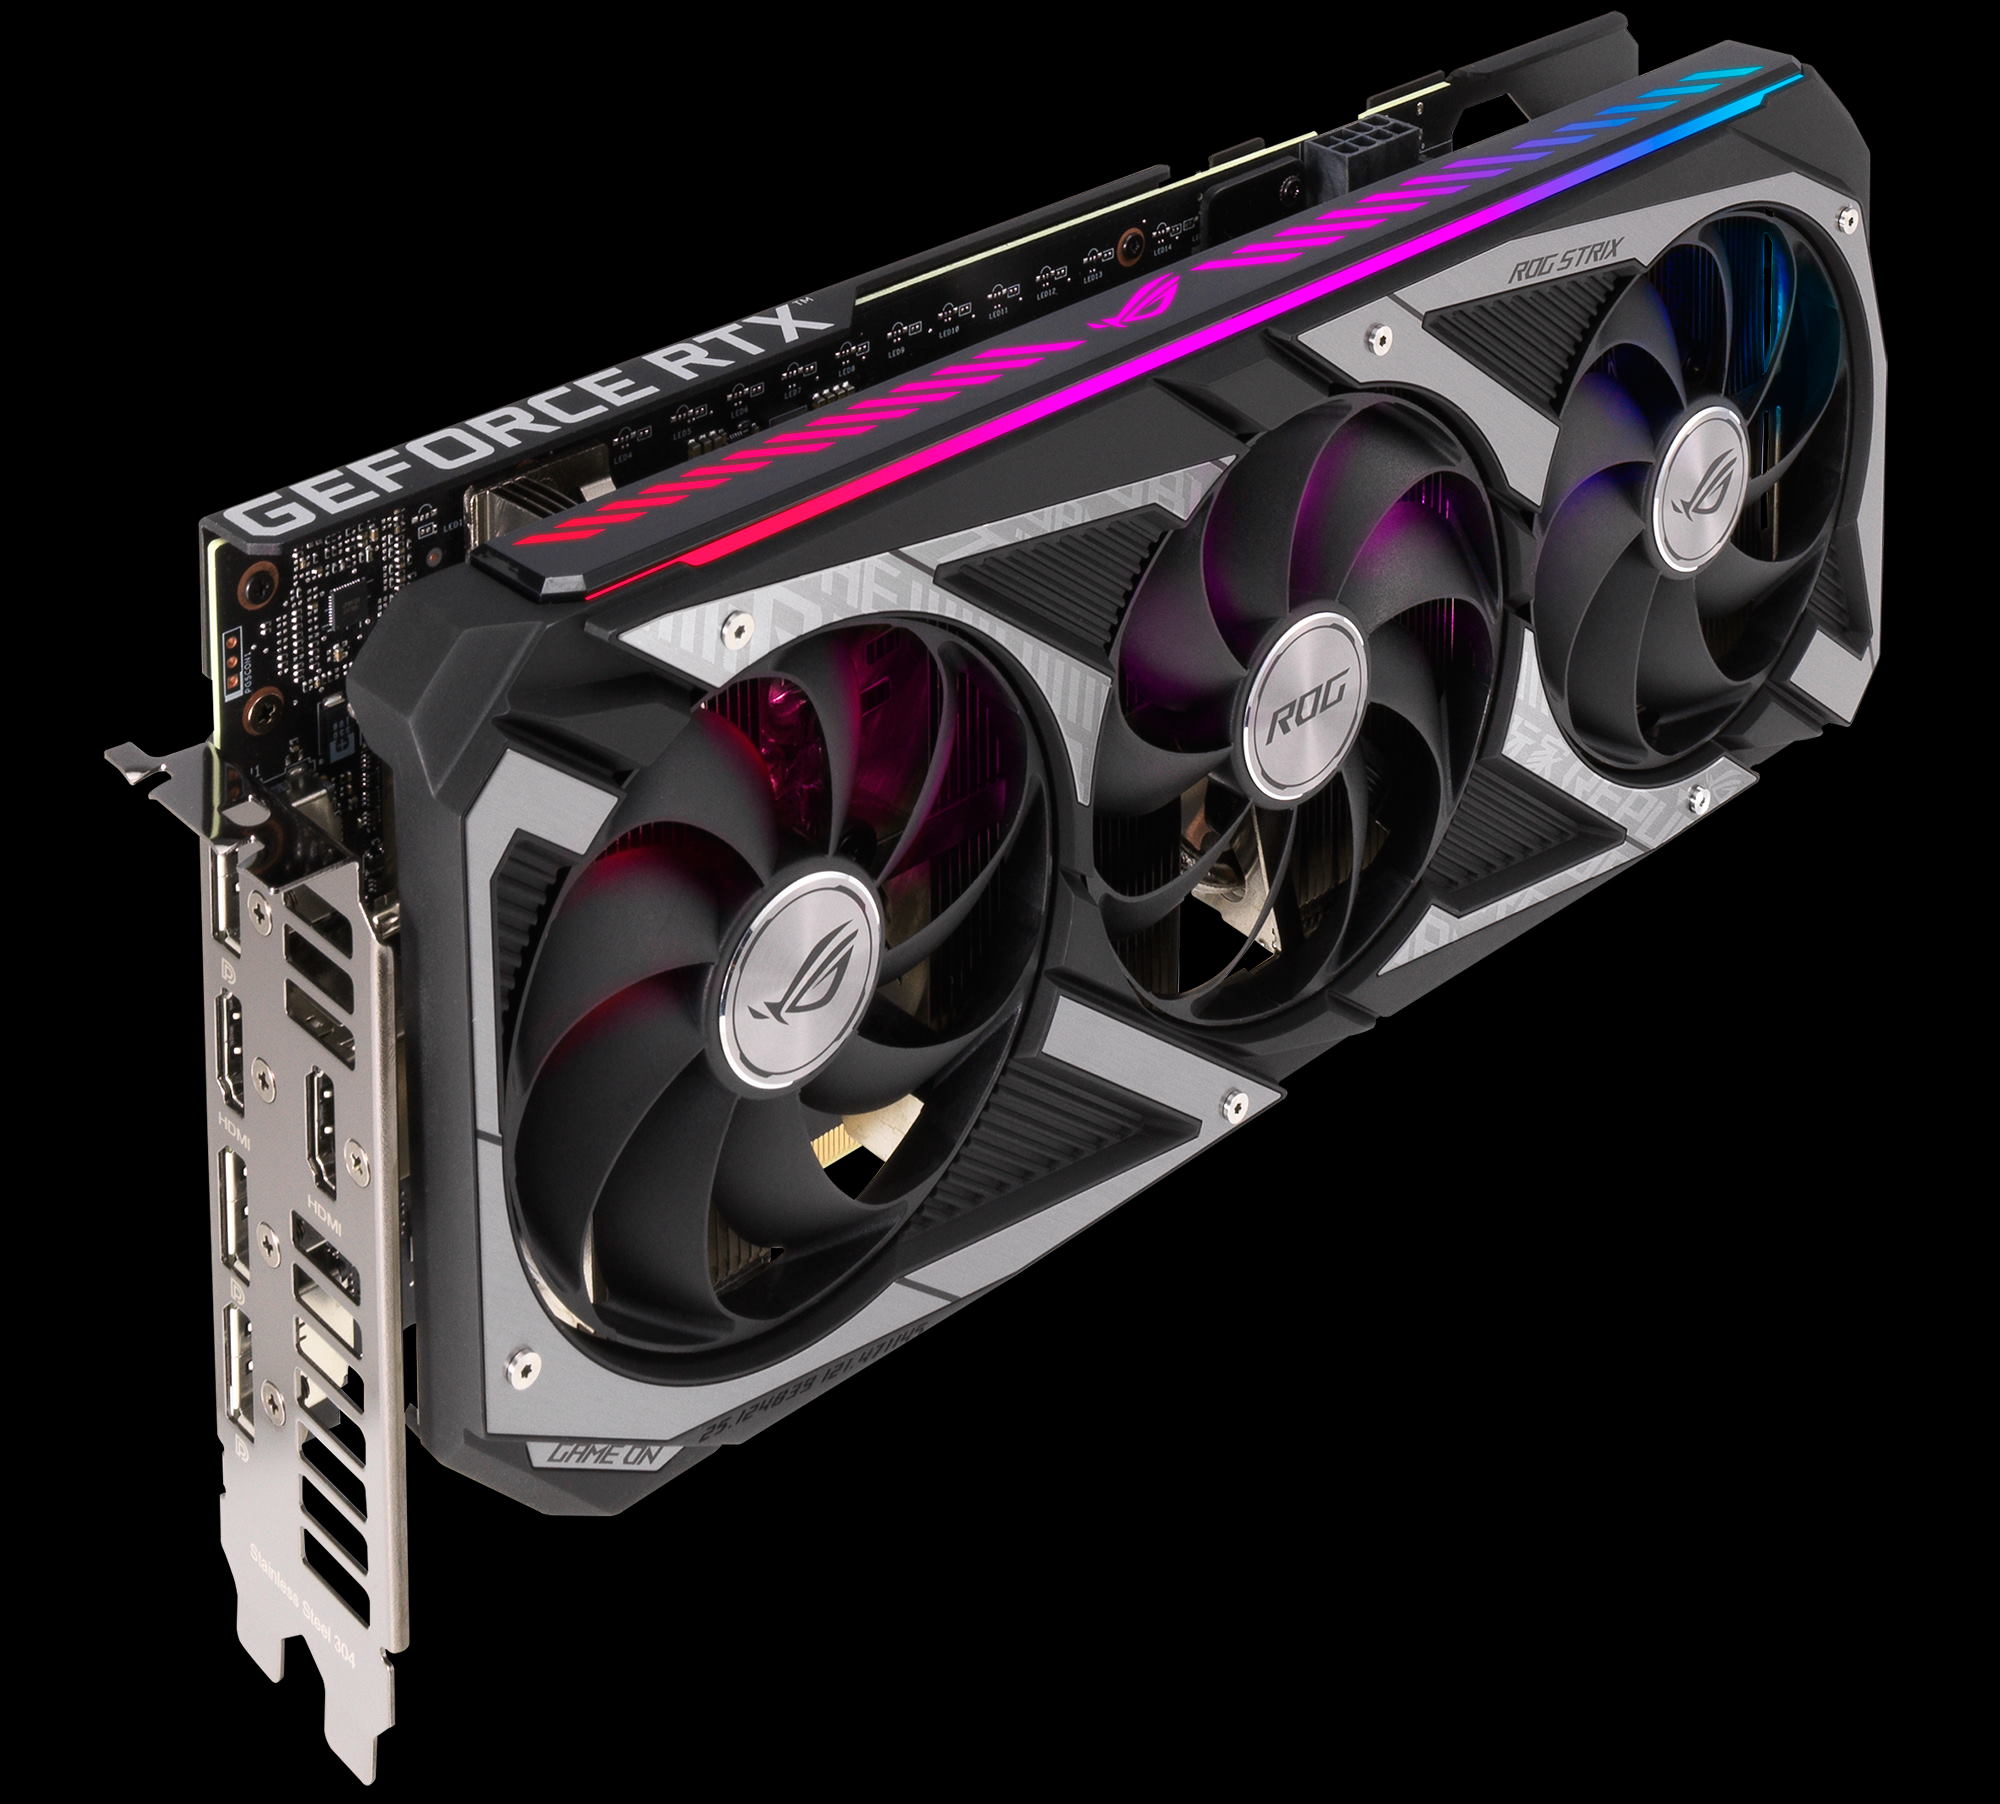 NVIDIA&amp;#39;s GeForce RTX 30-series family grows with new ASUS GeForce RTX 3050 graphics cards | ROG - Republic of Gamers Global